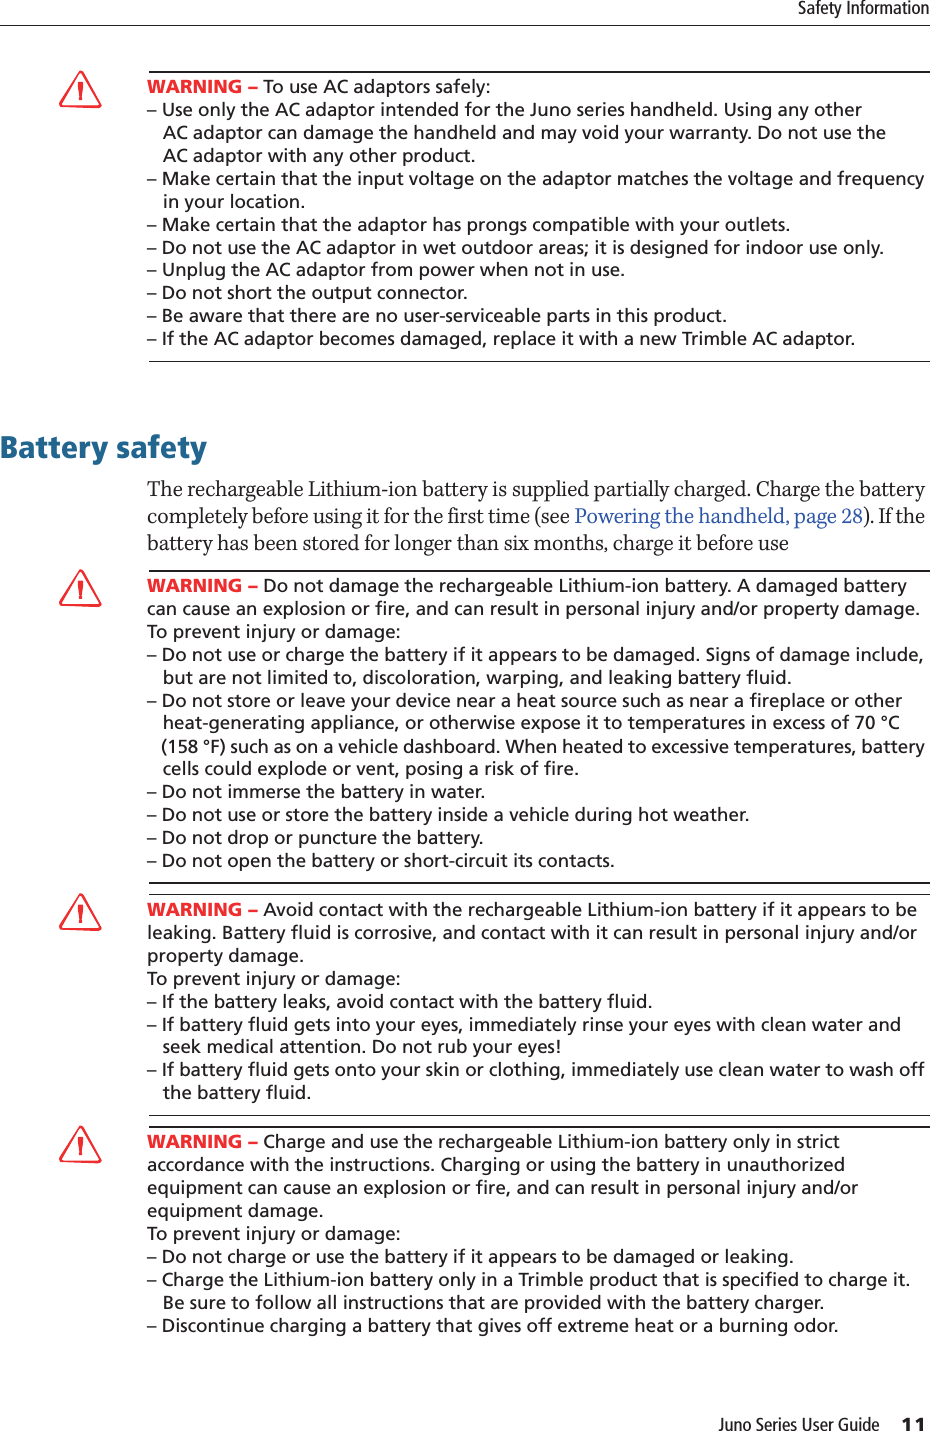 Juno Series User Guide     11Safety InformationCWARNING – To use AC adaptors safely:– Use only the AC adaptor intended for the Juno series handheld. Using any other    AC adaptor can damage the handheld and may void your warranty. Do not use the    AC adaptor with any other product.– Make certain that the input voltage on the adaptor matches the voltage and frequency    in your location. – Make certain that the adaptor has prongs compatible with your outlets.– Do not use the AC adaptor in wet outdoor areas; it is designed for indoor use only.– Unplug the AC adaptor from power when not in use.– Do not short the output connector.– Be aware that there are no user-serviceable parts in this product.– If the AC adaptor becomes damaged, replace it with a new Trimble AC adaptor.Battery safetyThe rechargeable Lithium-ion battery is supplied partially charged. Charge the battery completely before using it for the first time (see Powering the handheld, page 28). If the battery has been stored for longer than six months, charge it before useCWARNING – Do not damage the rechargeable Lithium-ion battery. A damaged battery can cause an explosion or fire, and can result in personal injury and/or property damage. To prevent injury or damage: – Do not use or charge the battery if it appears to be damaged. Signs of damage include,    but are not limited to, discoloration, warping, and leaking battery fluid.– Do not store or leave your device near a heat source such as near a fireplace or other    heat-generating appliance, or otherwise expose it to temperatures in excess of 70 °C    (158 °F) such as on a vehicle dashboard. When heated to excessive temperatures, battery    cells could explode or vent, posing a risk of fire. – Do not immerse the battery in water. – Do not use or store the battery inside a vehicle during hot weather. – Do not drop or puncture the battery. – Do not open the battery or short-circuit its contacts.CWARNING – Avoid contact with the rechargeable Lithium-ion battery if it appears to be leaking. Battery fluid is corrosive, and contact with it can result in personal injury and/or property damage.To prevent injury or damage:– If the battery leaks, avoid contact with the battery fluid. – If battery fluid gets into your eyes, immediately rinse your eyes with clean water and    seek medical attention. Do not rub your eyes! – If battery fluid gets onto your skin or clothing, immediately use clean water to wash off    the battery fluid.CWARNING – Charge and use the rechargeable Lithium-ion battery only in strict accordance with the instructions. Charging or using the battery in unauthorized equipment can cause an explosion or fire, and can result in personal injury and/or equipment damage. To prevent injury or damage: – Do not charge or use the battery if it appears to be damaged or leaking.– Charge the Lithium-ion battery only in a Trimble product that is specified to charge it.    Be sure to follow all instructions that are provided with the battery charger. – Discontinue charging a battery that gives off extreme heat or a burning odor.